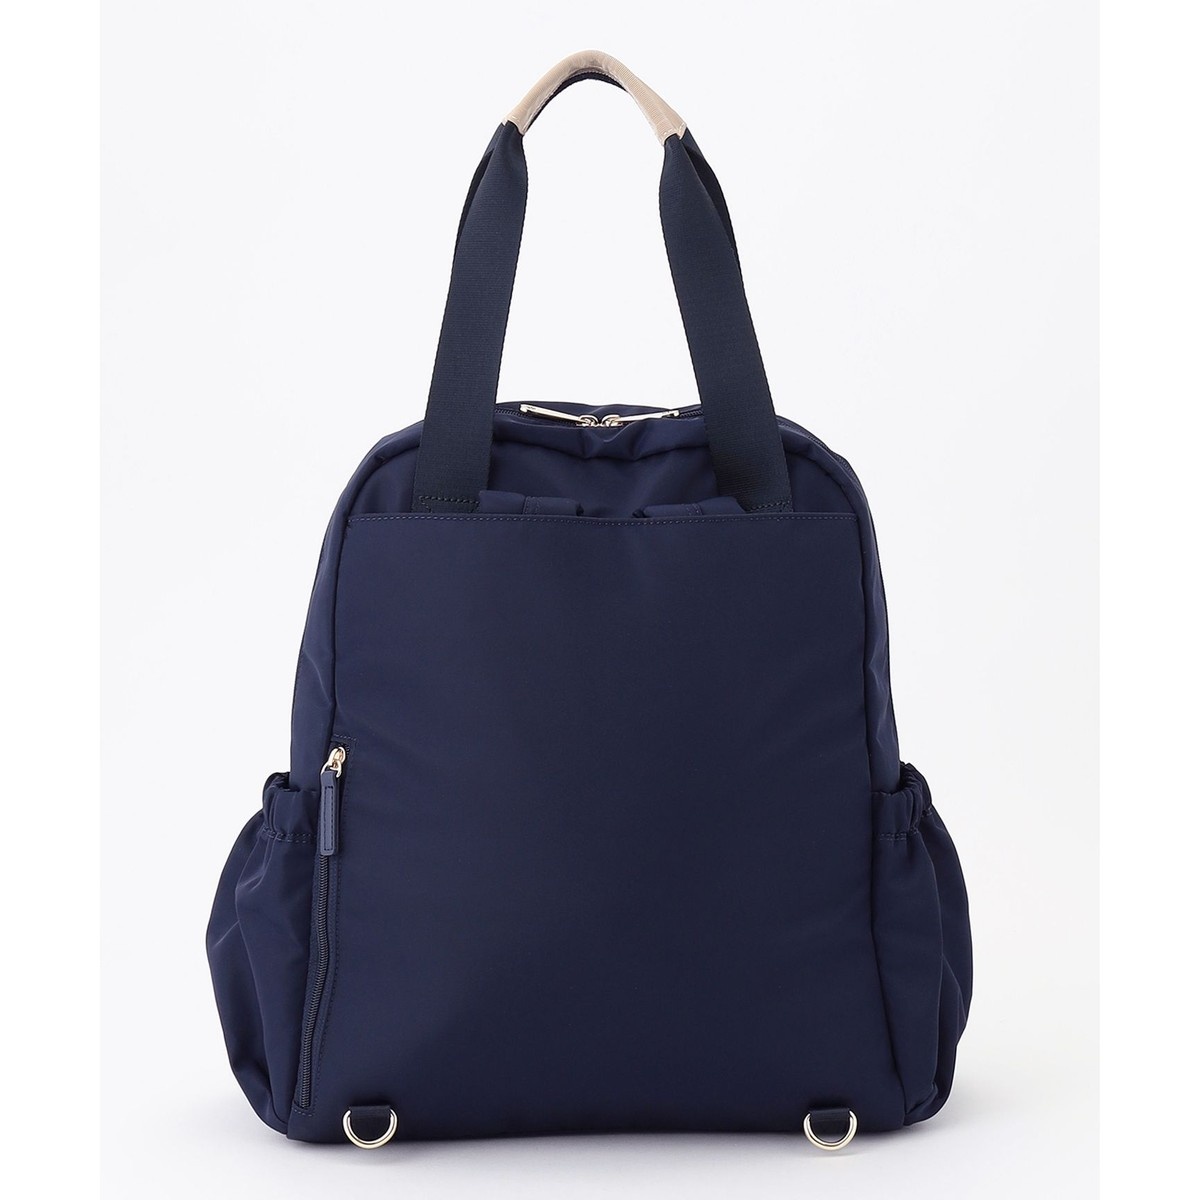 TOCCA LOGO MOTHERS BAG 2WAYバッグ | トッカ バンビーニ(TOCCA 